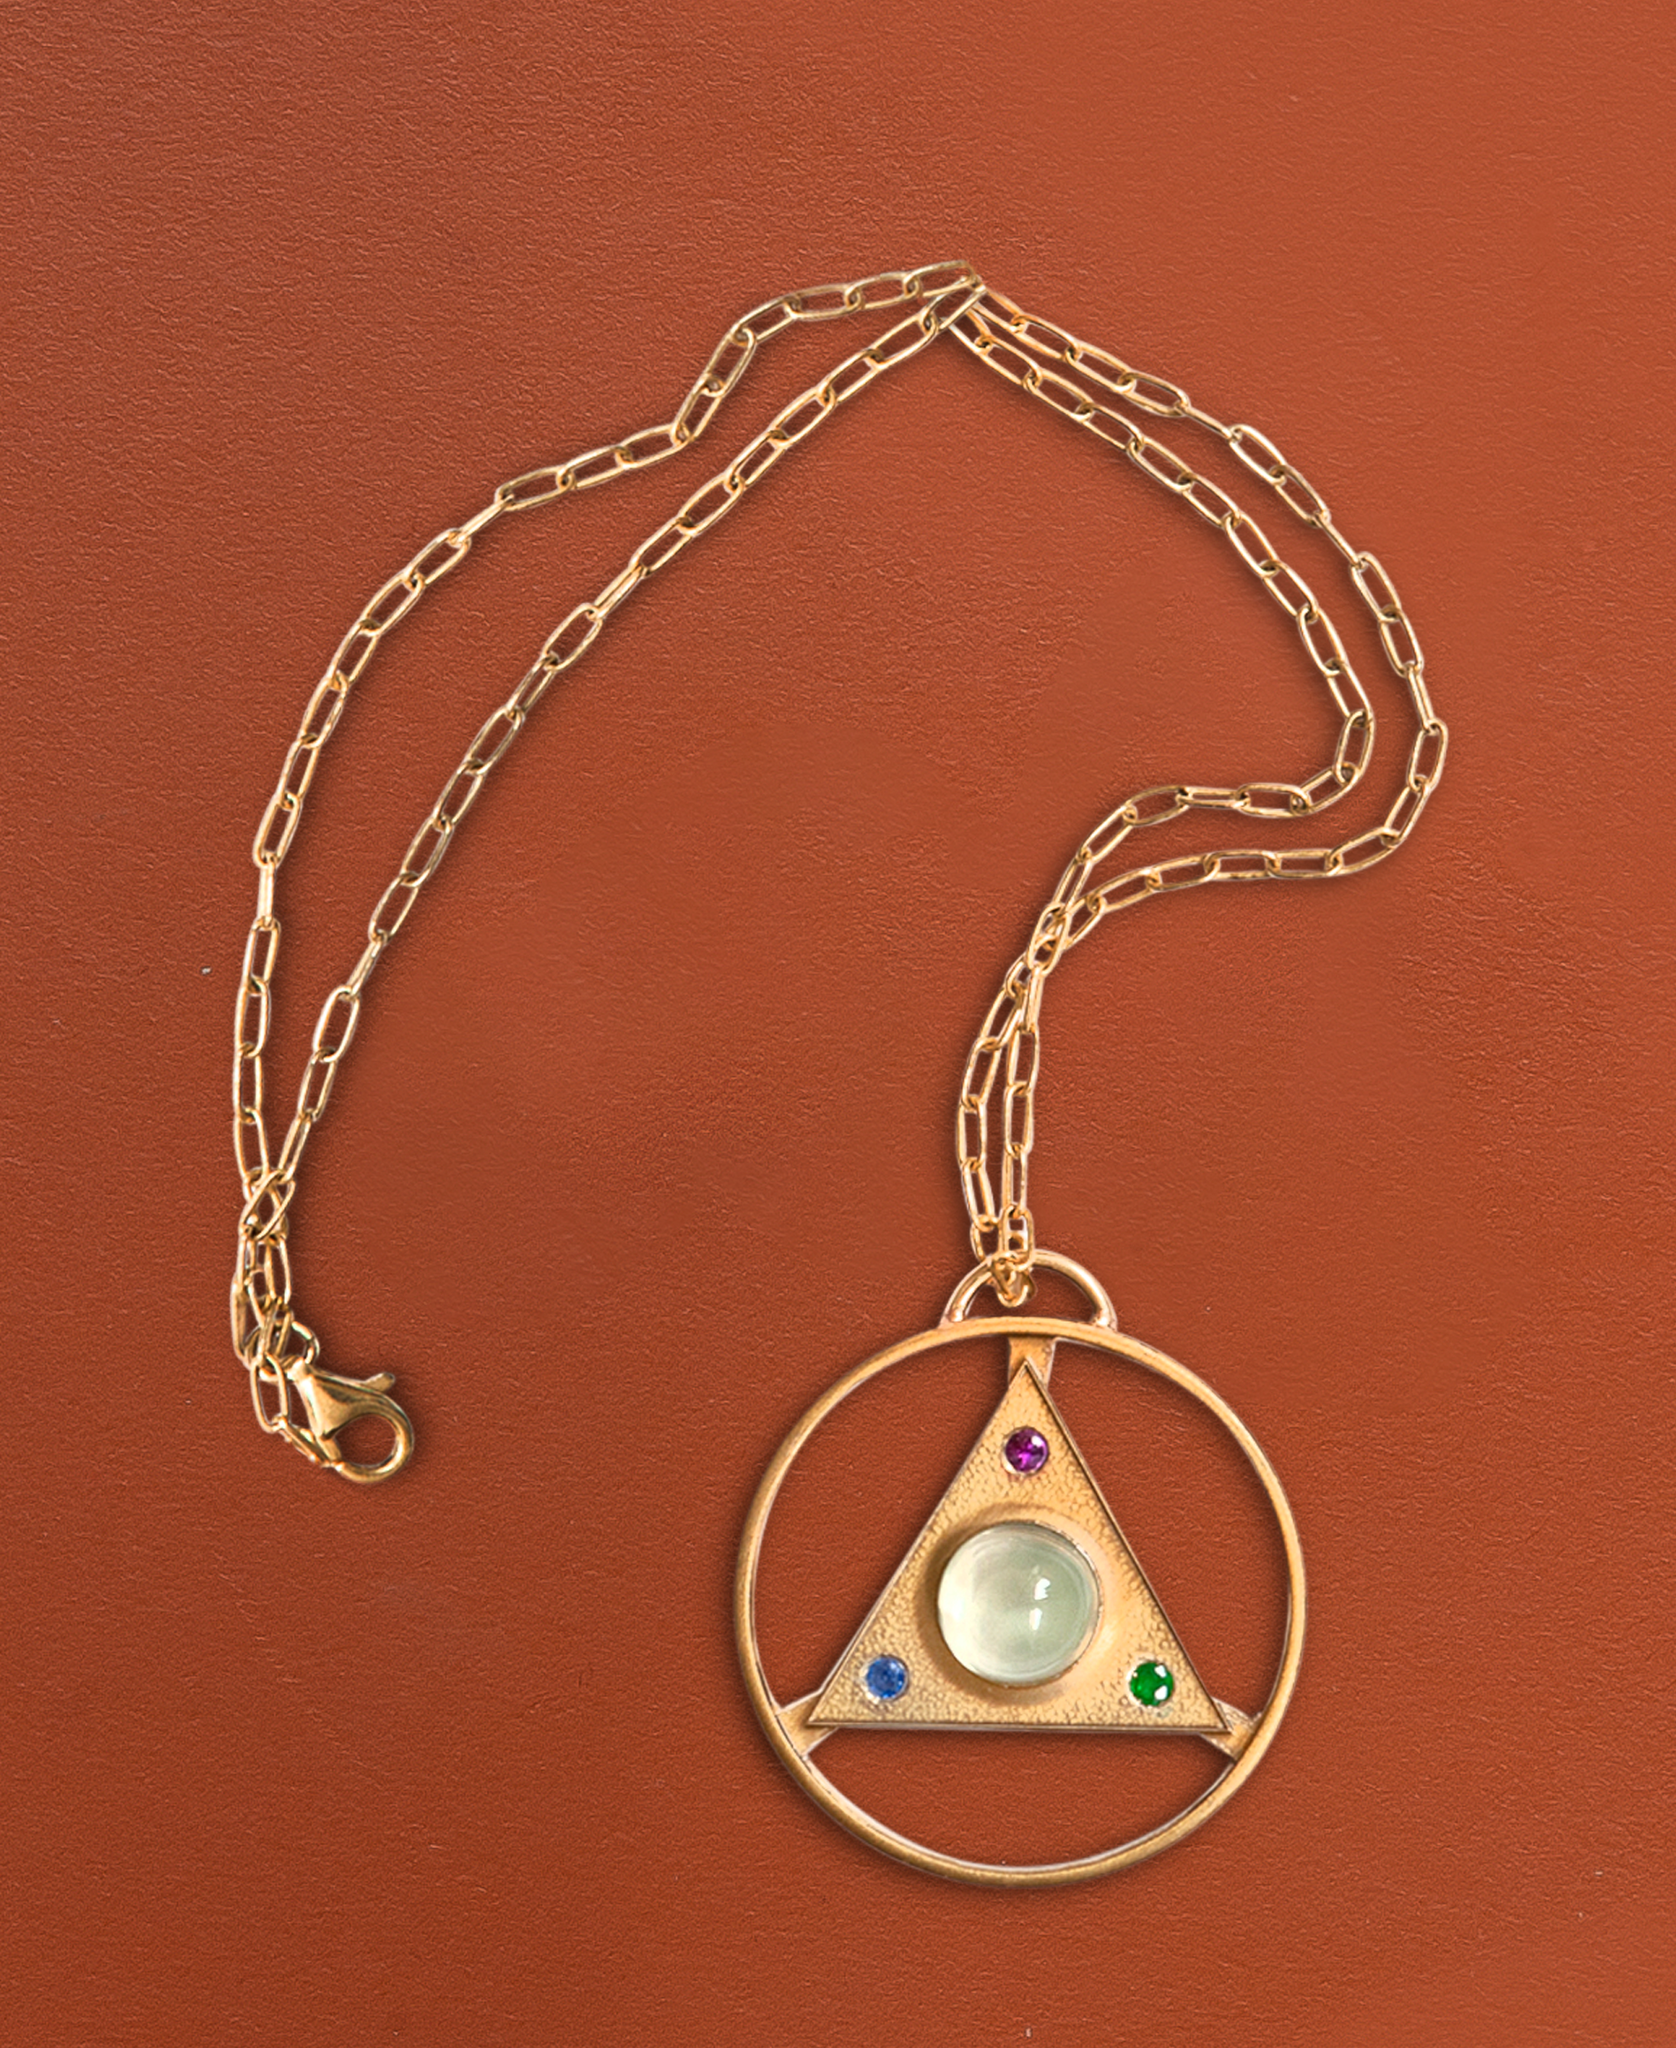 A special AA token necklace celebrating a sober anniversary. Set with Moonstone, Ruby, Emerald, and Sapphire.  